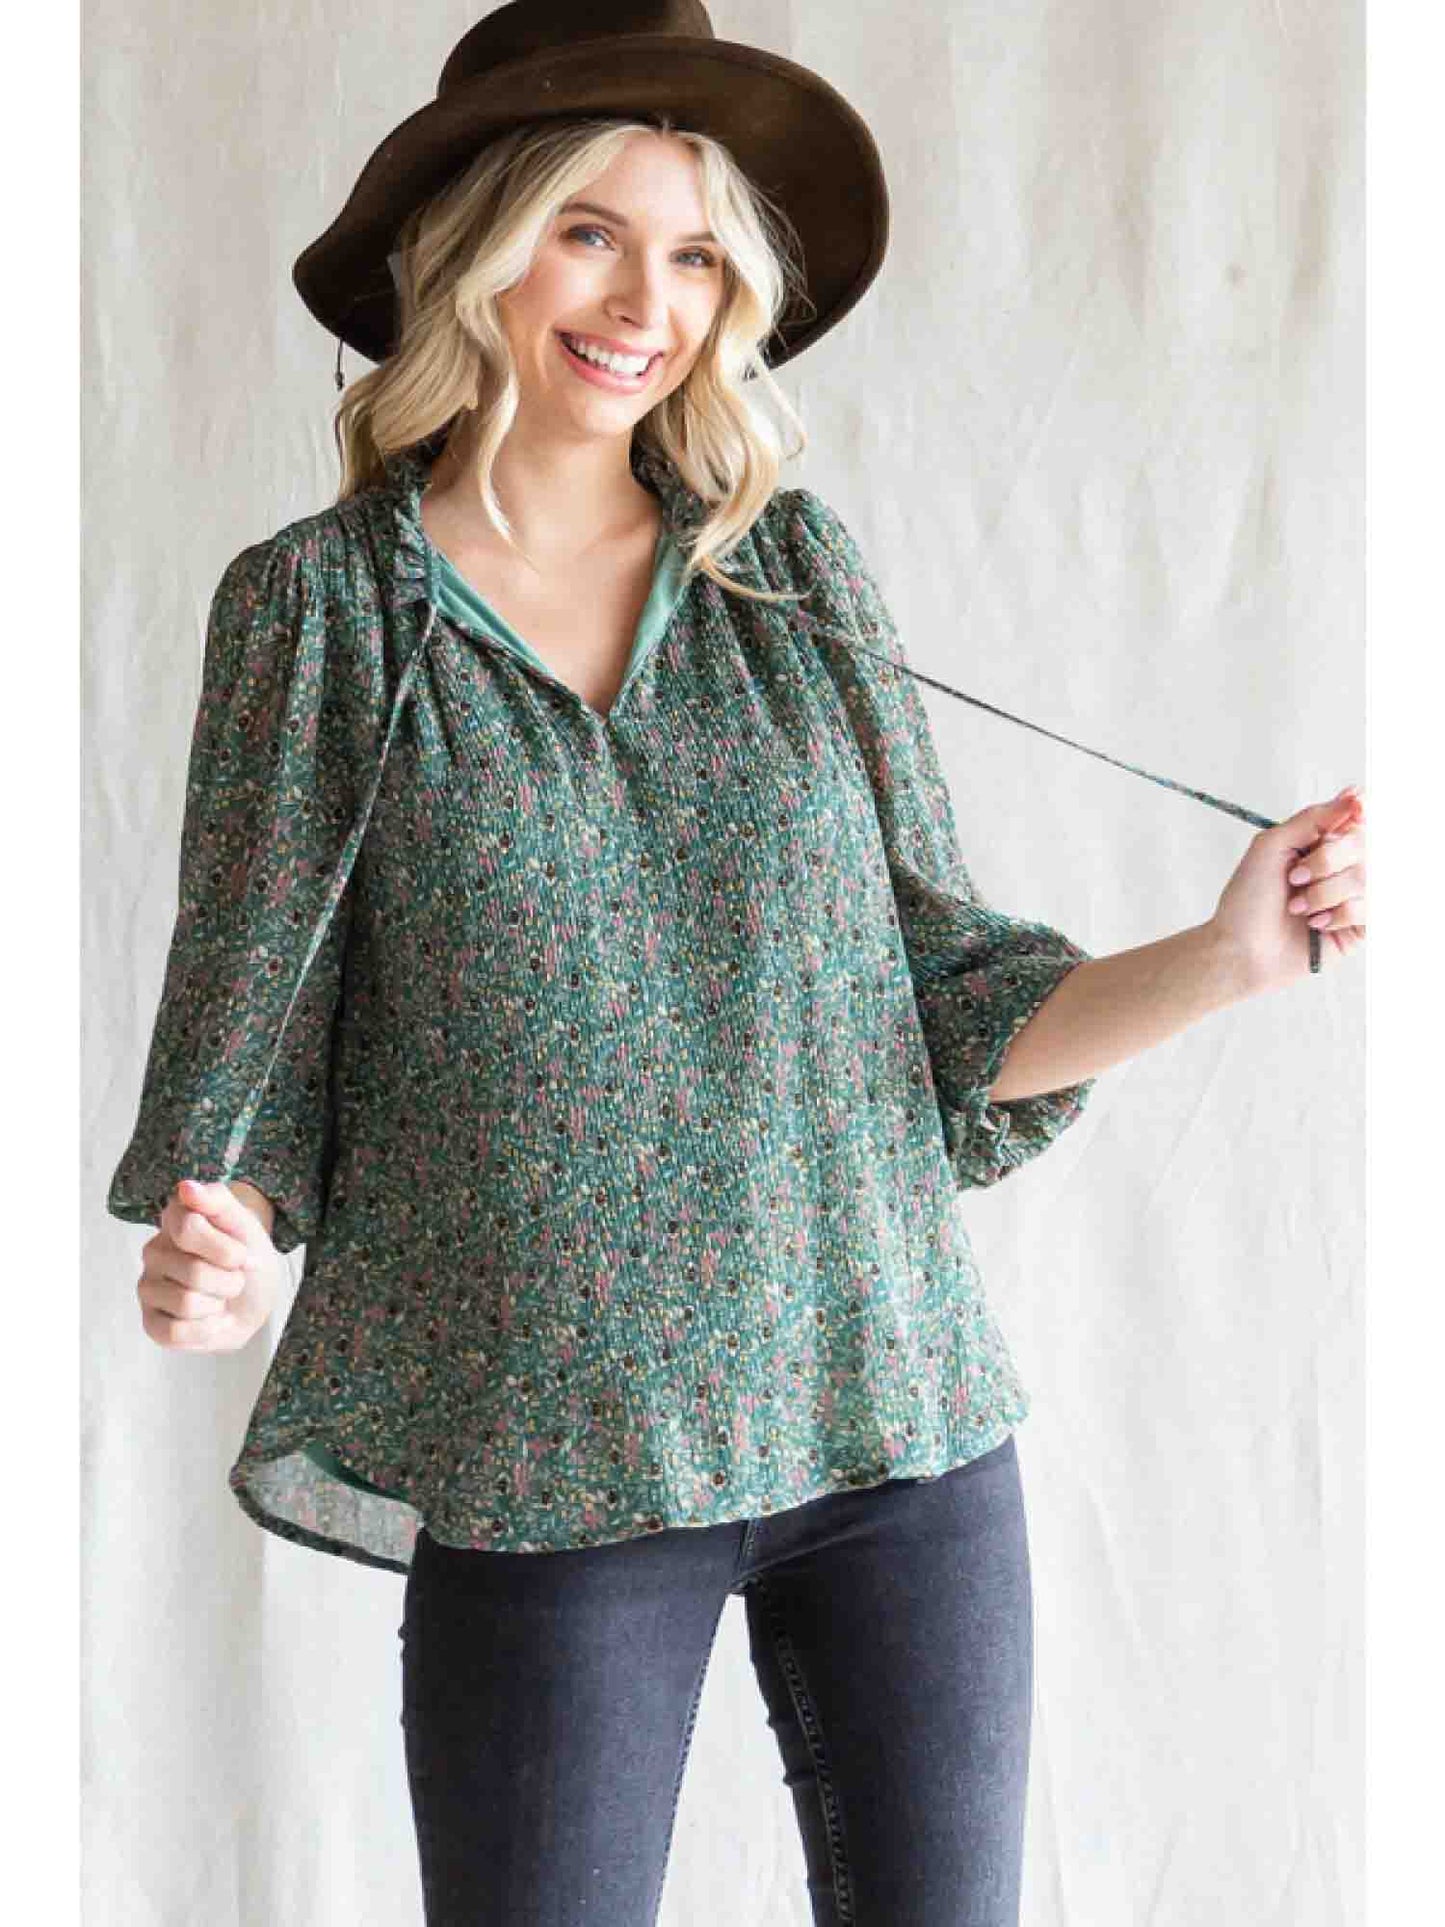 Textured Print Chiffon Top with Poet Sleeves in Hunter Green by Jodifl